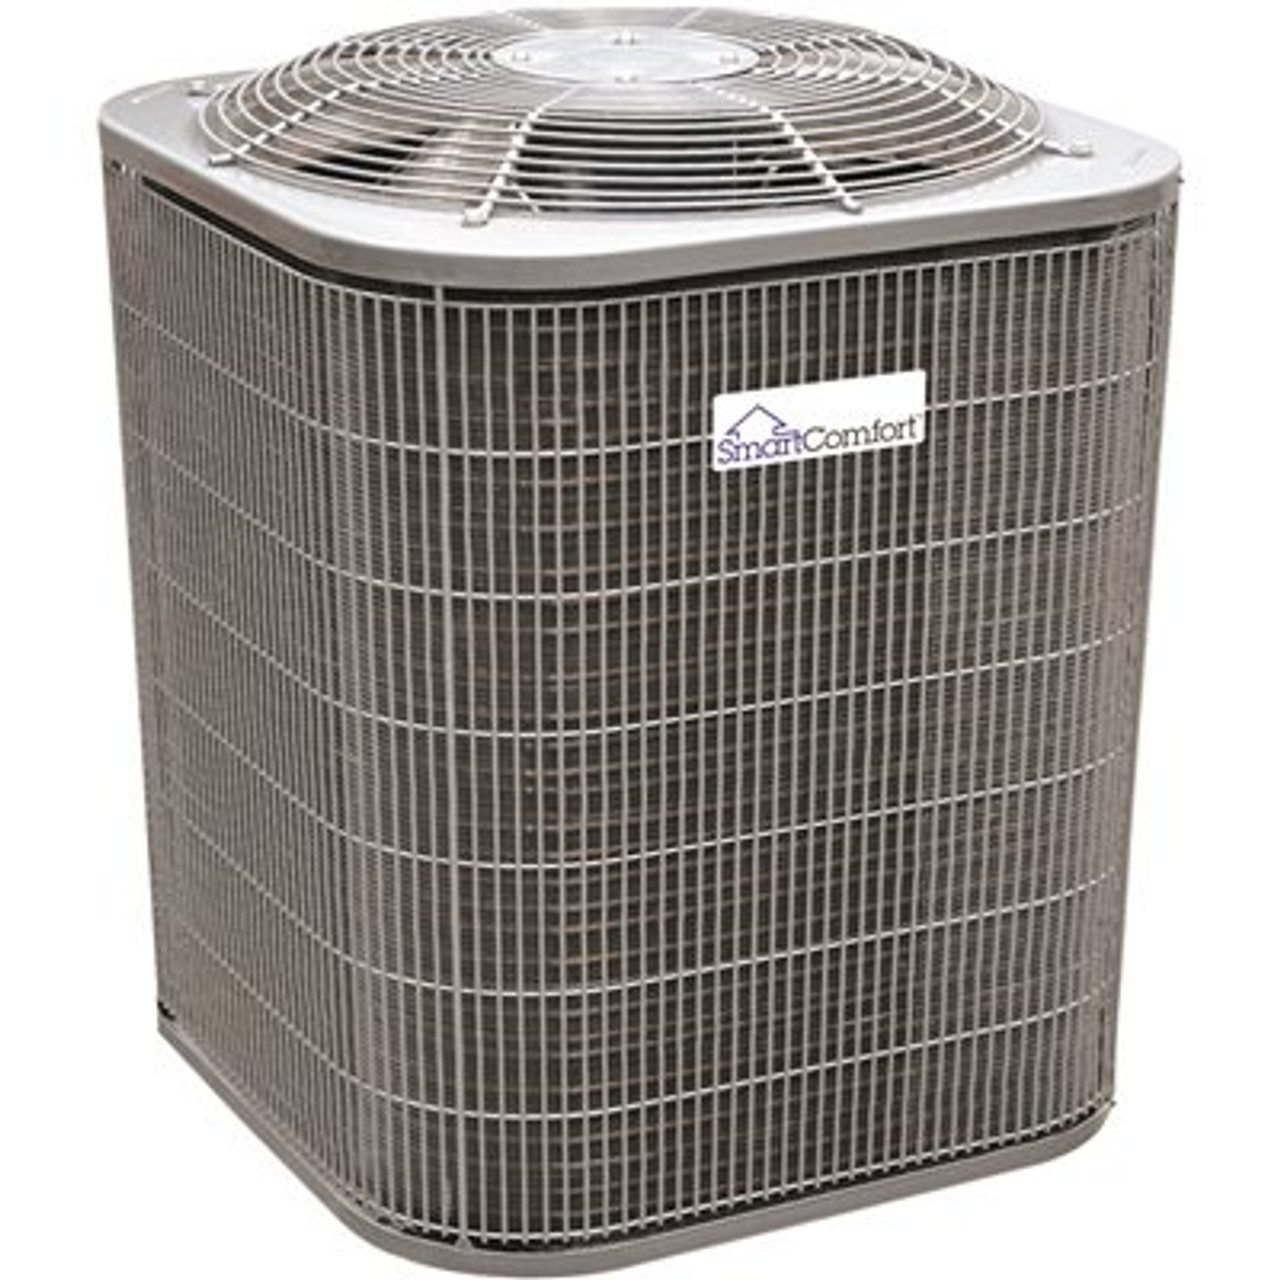 SMARTCOMFORT BY CARRIER 3 Ton 15 SEER Ac Condenser For Se And Sw Regions